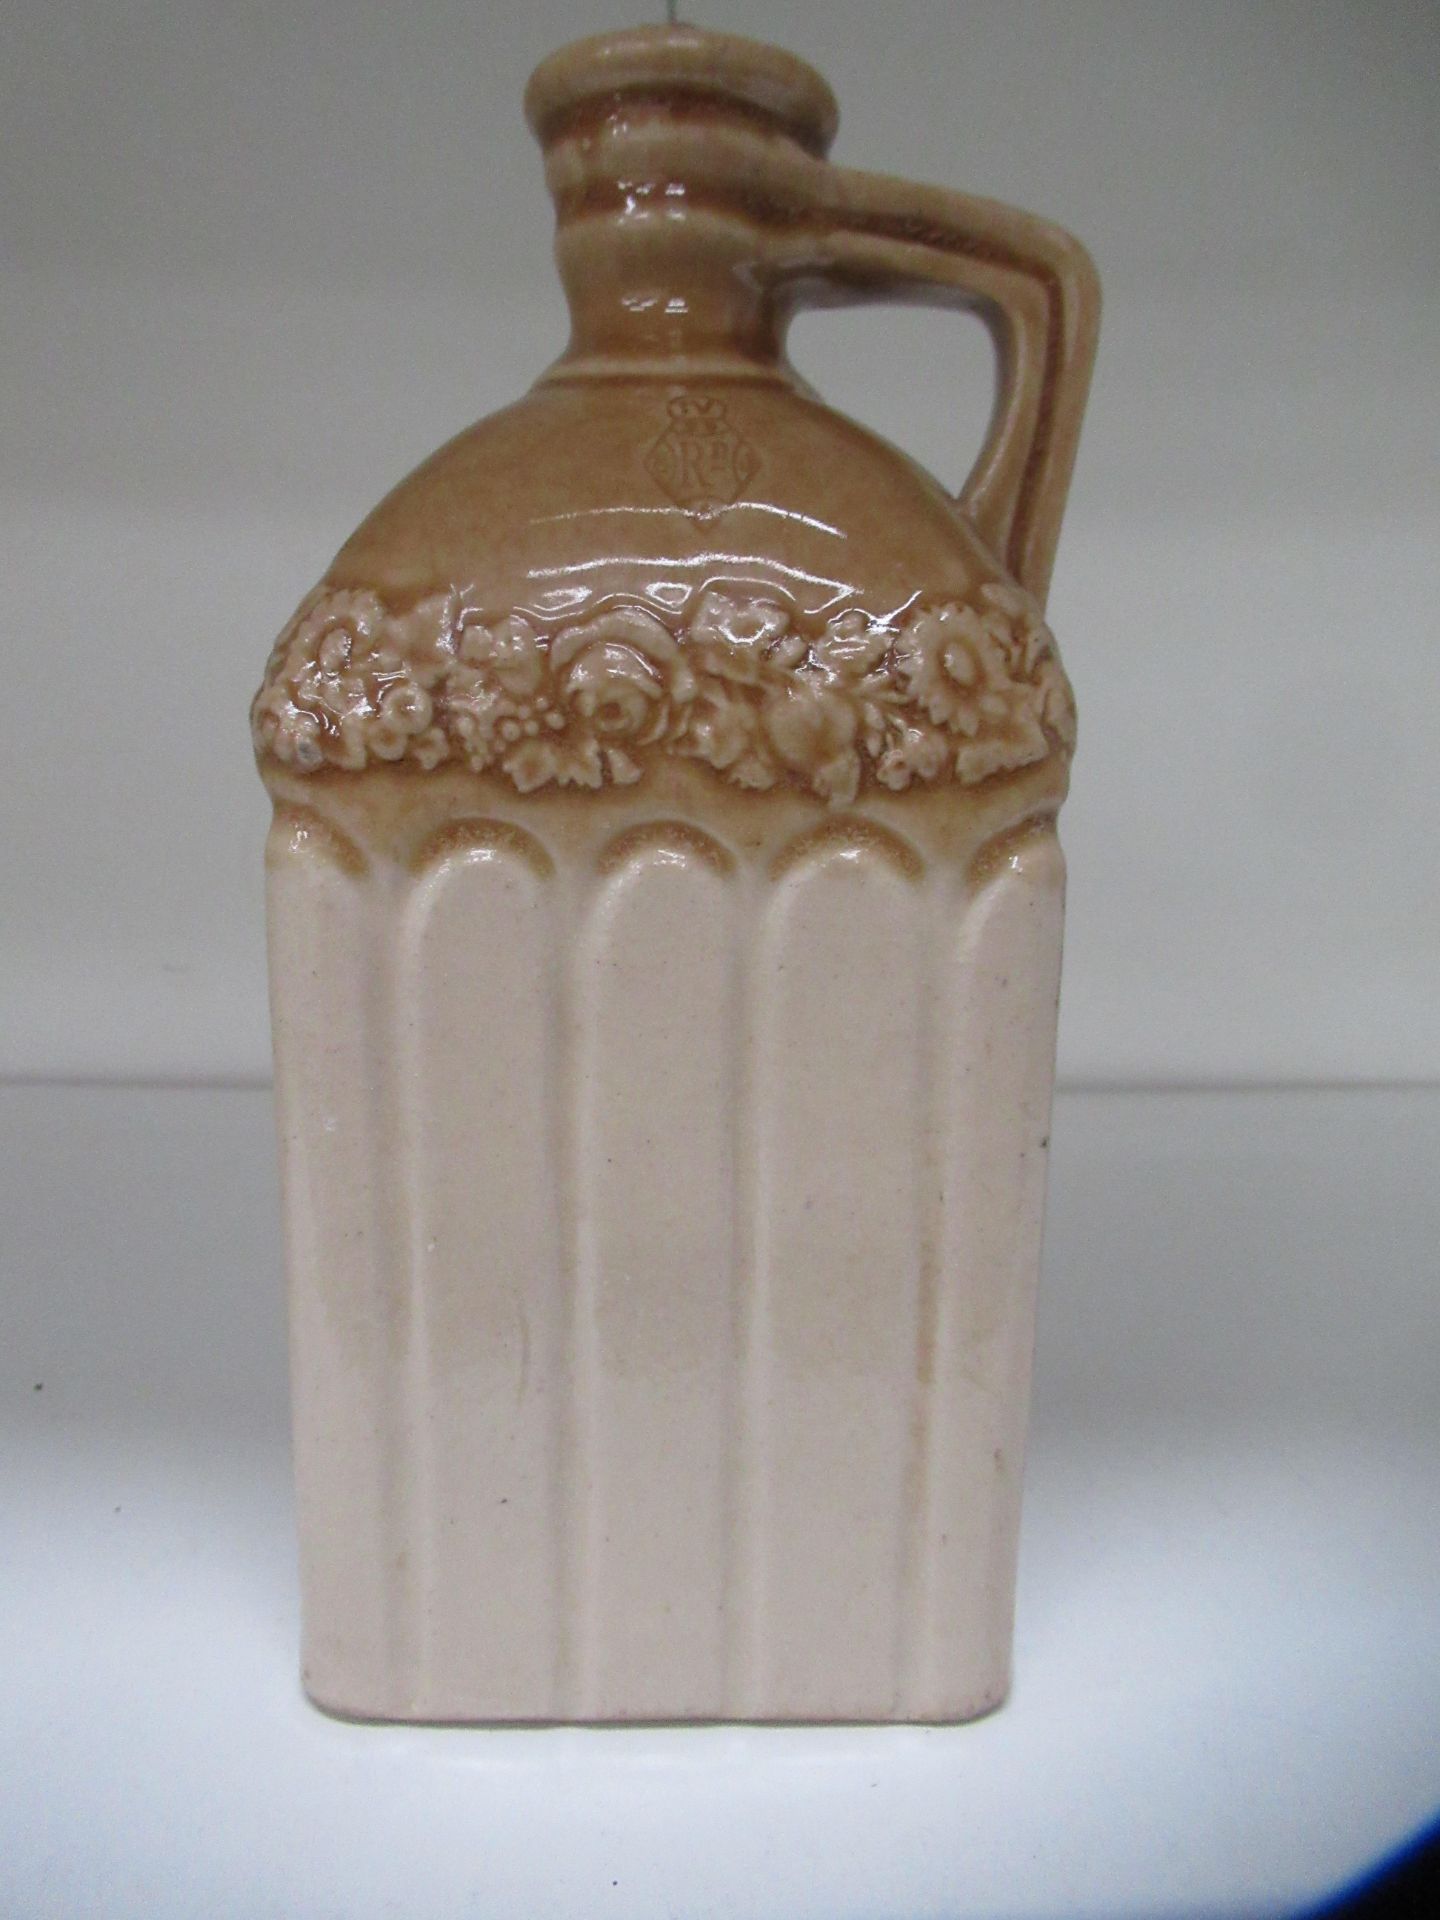 Stone bottle with floral detailing below bottle neck and 'G' stamp on handle - Image 3 of 8